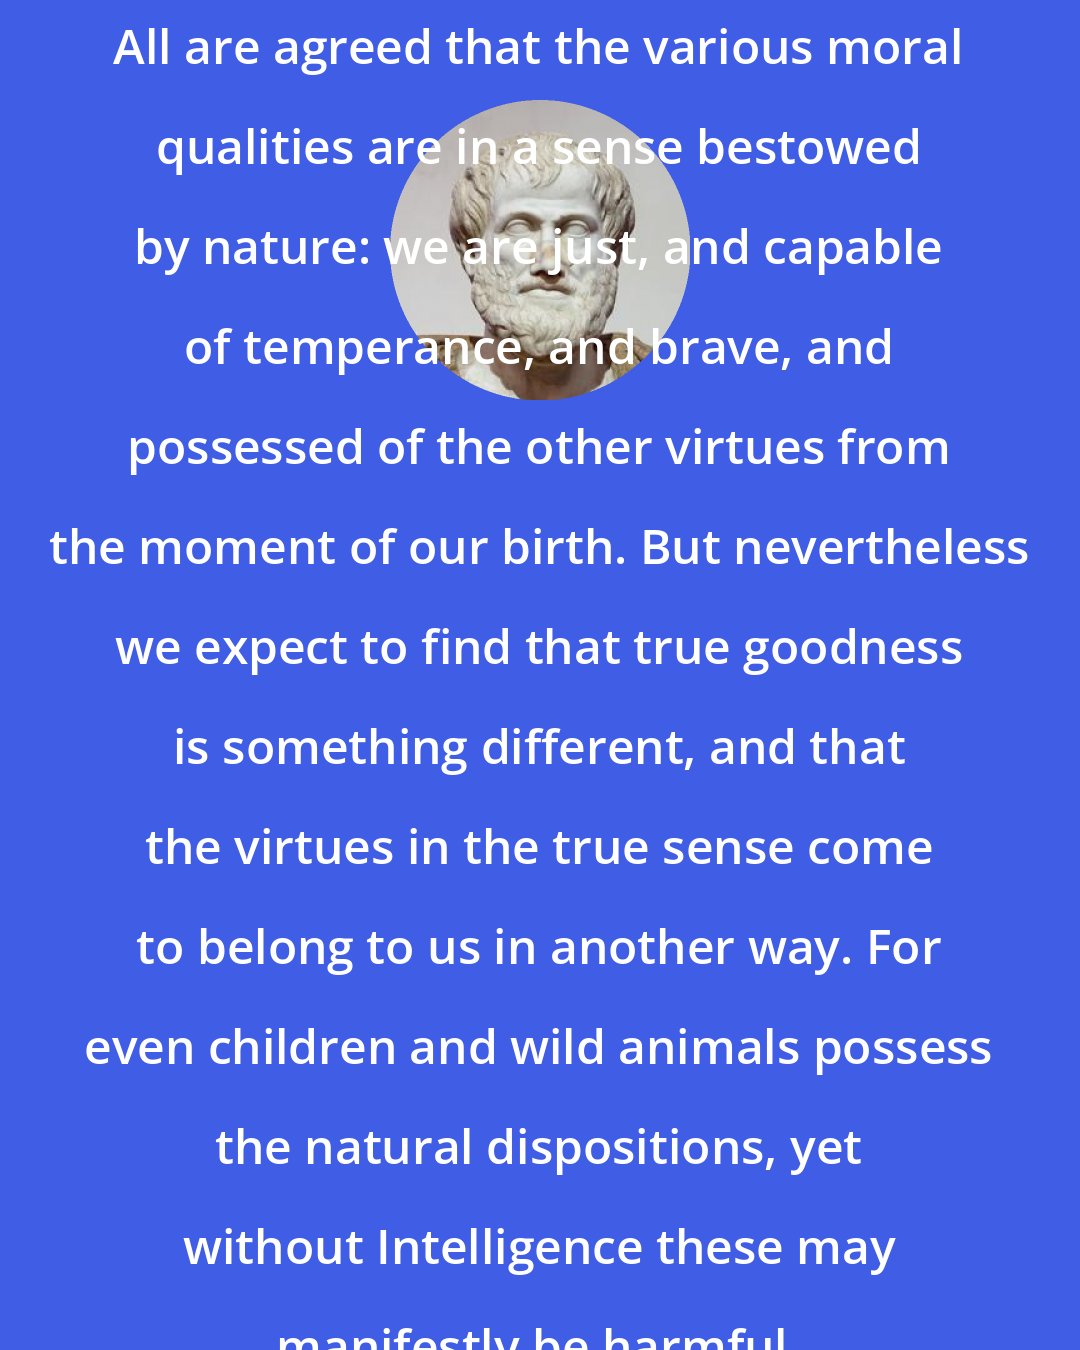 Aristotle: All are agreed that the various moral qualities are in a sense bestowed by nature: we are just, and capable of temperance, and brave, and possessed of the other virtues from the moment of our birth. But nevertheless we expect to find that true goodness is something different, and that the virtues in the true sense come to belong to us in another way. For even children and wild animals possess the natural dispositions, yet without Intelligence these may manifestly be harmful.